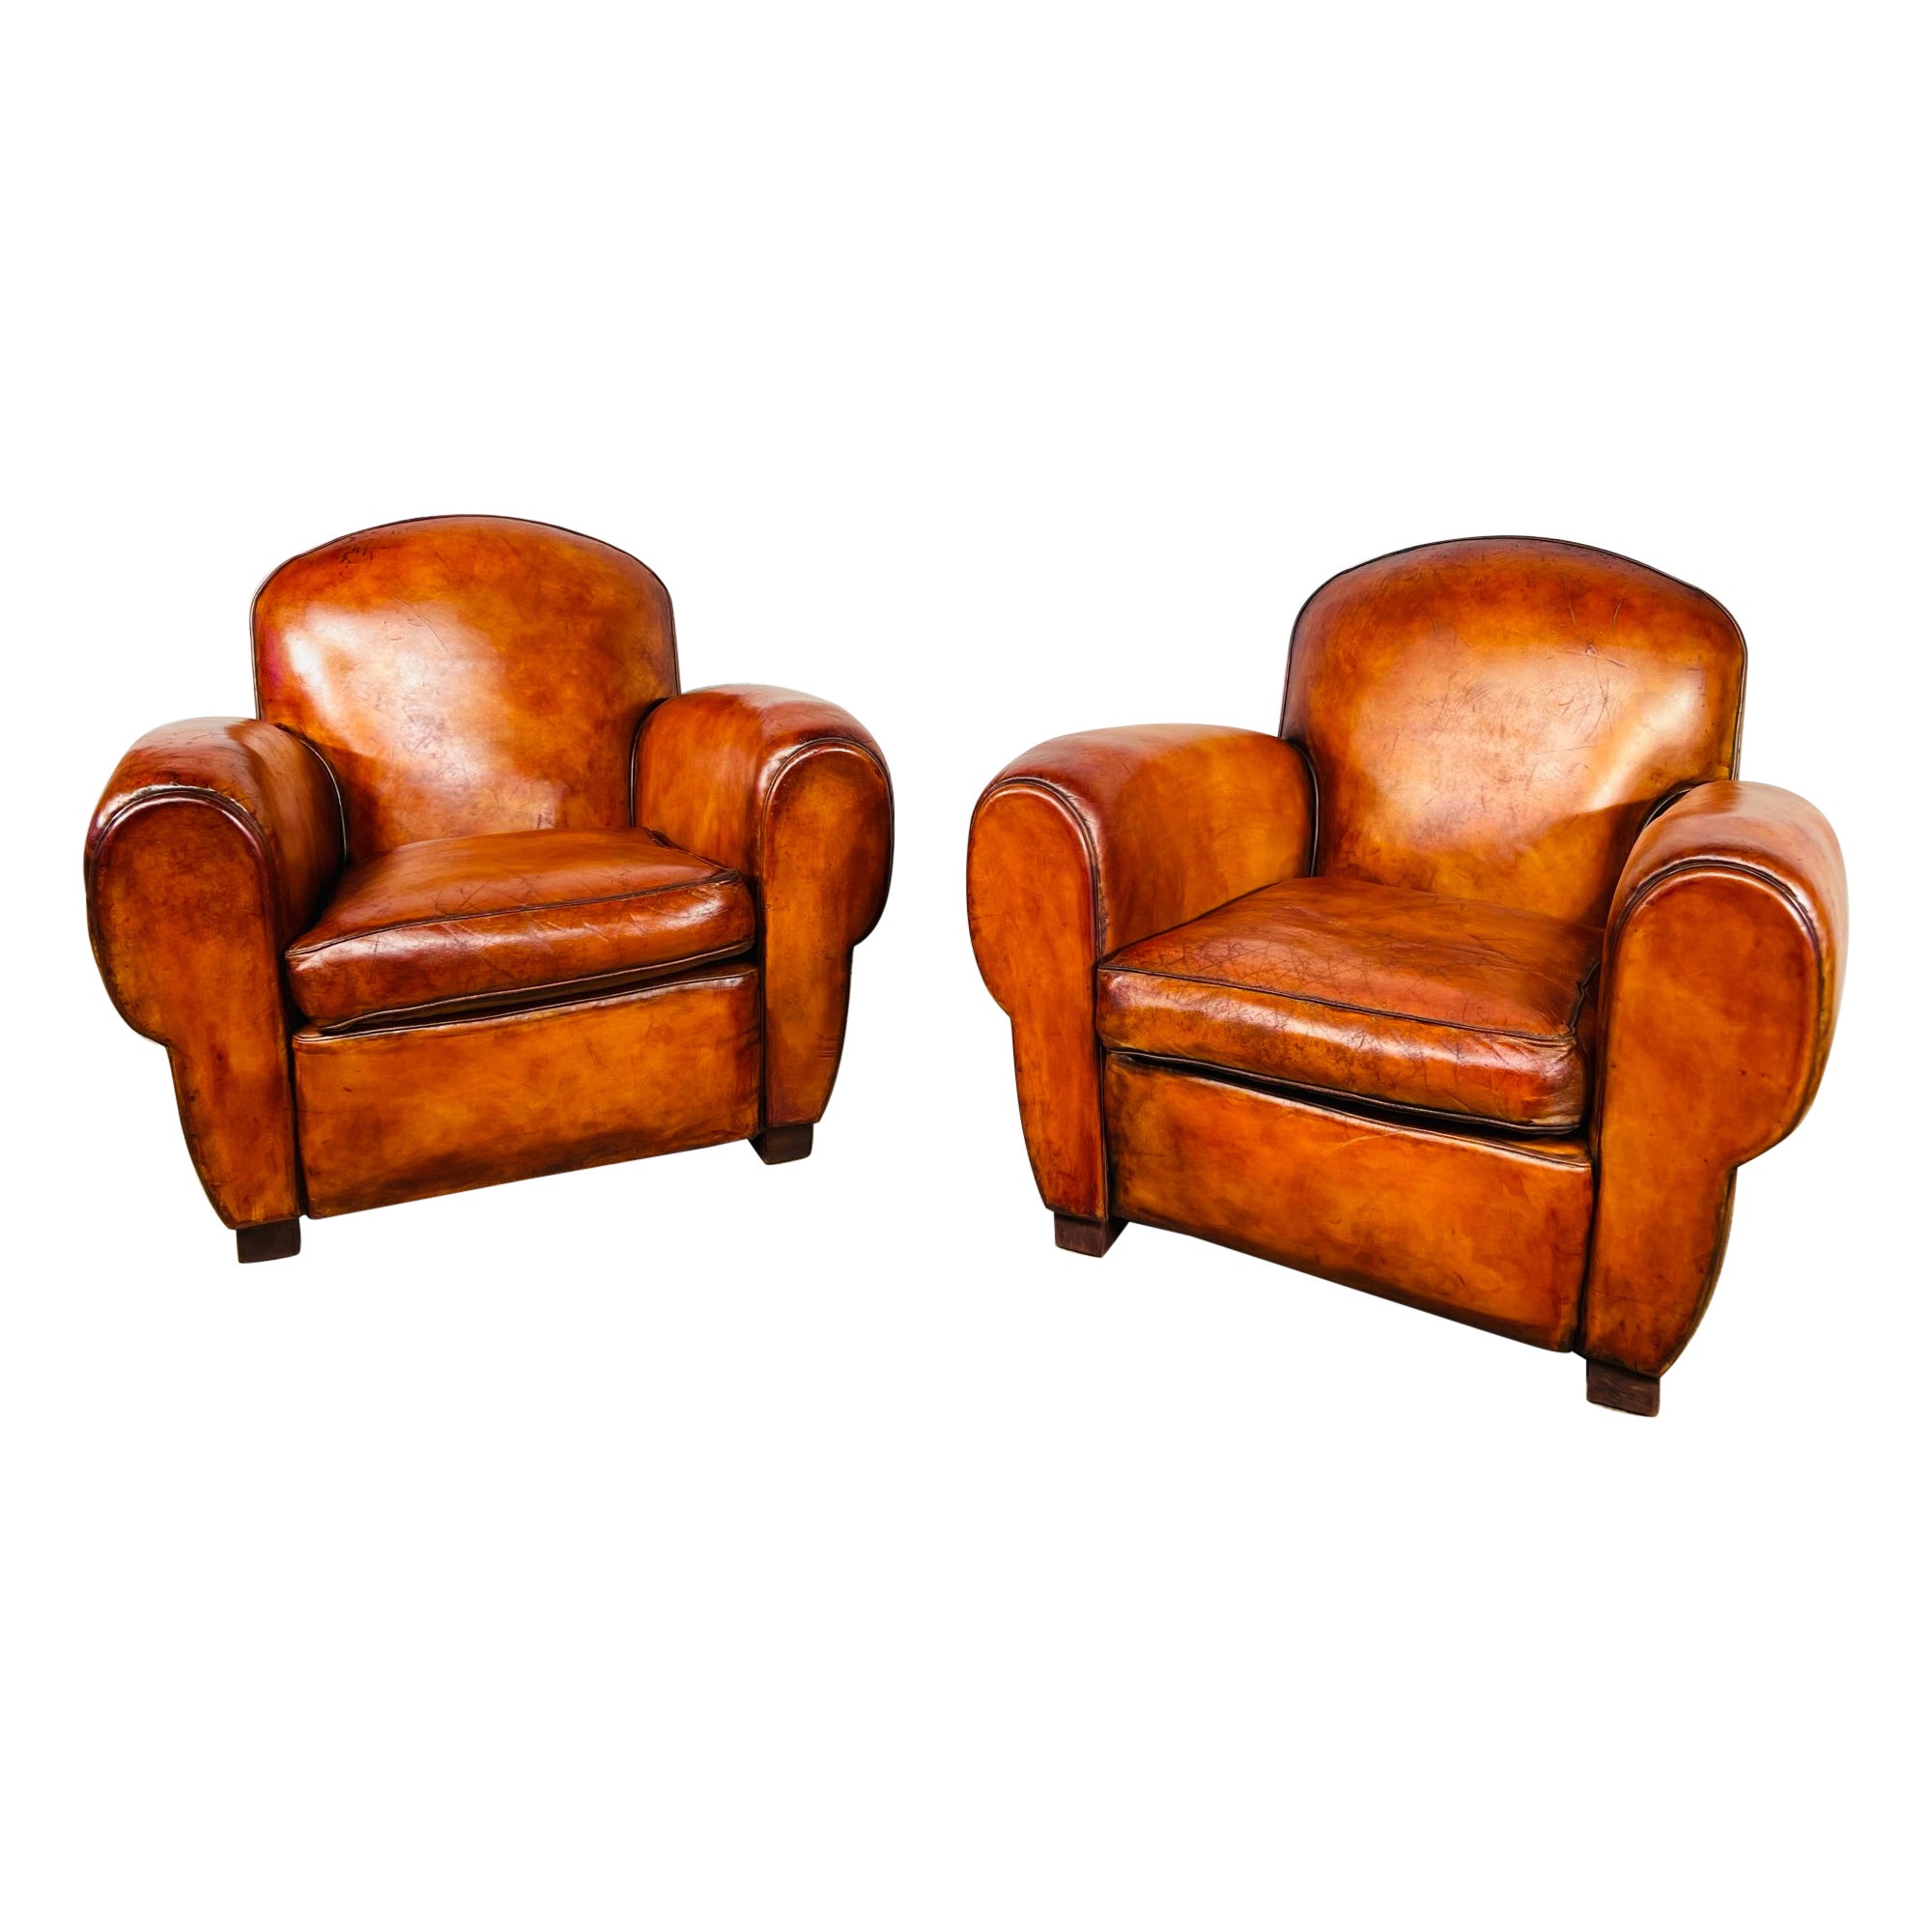 Stunning Pair of Leather French Club Chairs circa 1930 Patinated Cognac Color